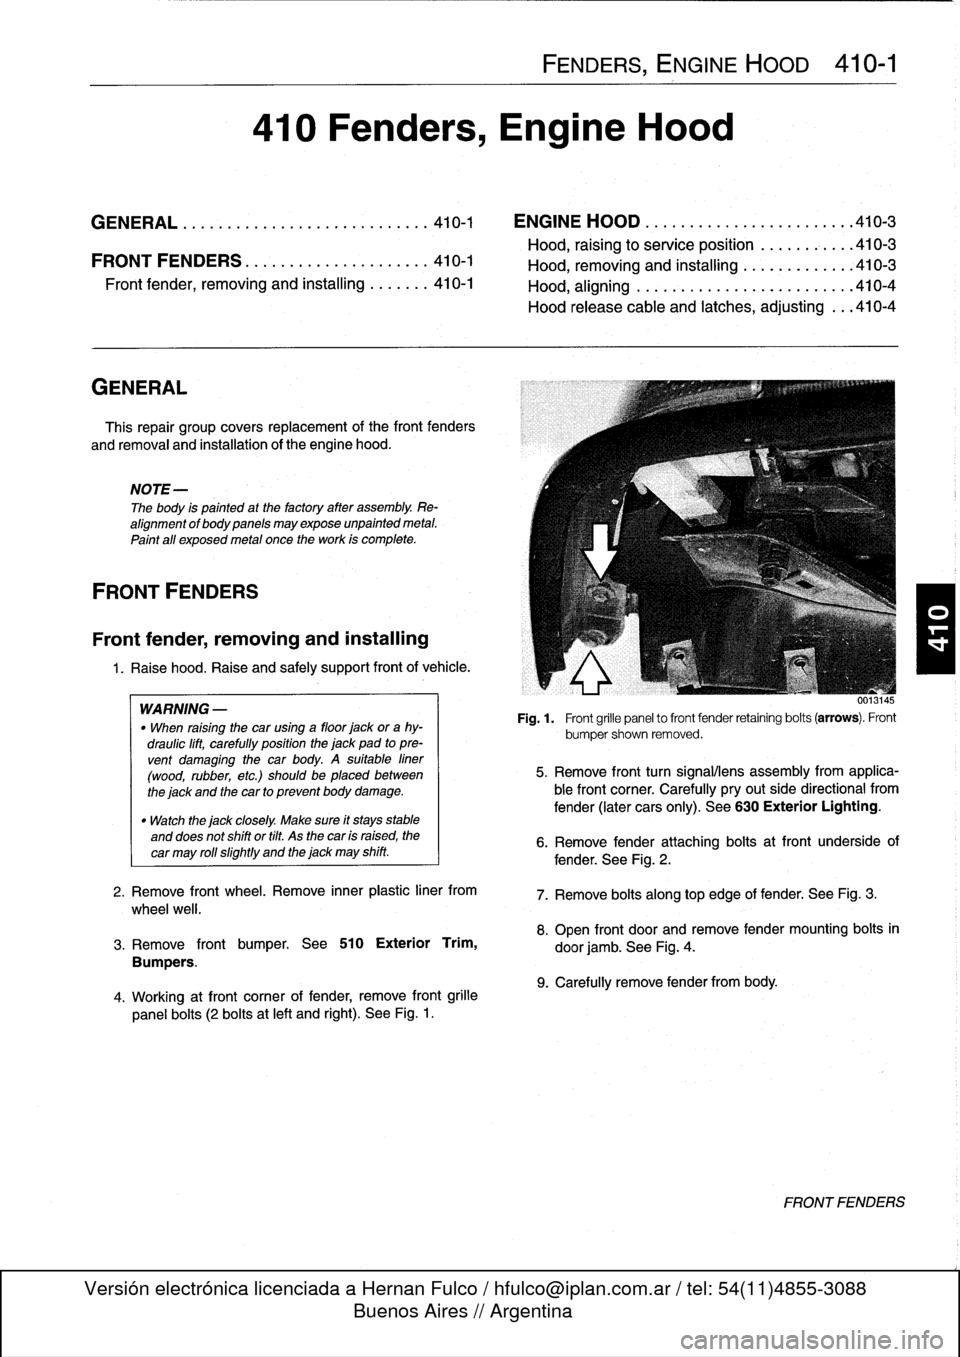 BMW 323i 1993 E36 Workshop Manual 
GENERAL

This
repair
group
covers
replacement
of
the
front
fenders

and
removal
and
installation
of
the
engine
hood
.

NOTE-

The
body
is
painted
at
the
factoryafter
assembly
.
Re-
alignment
of
body
